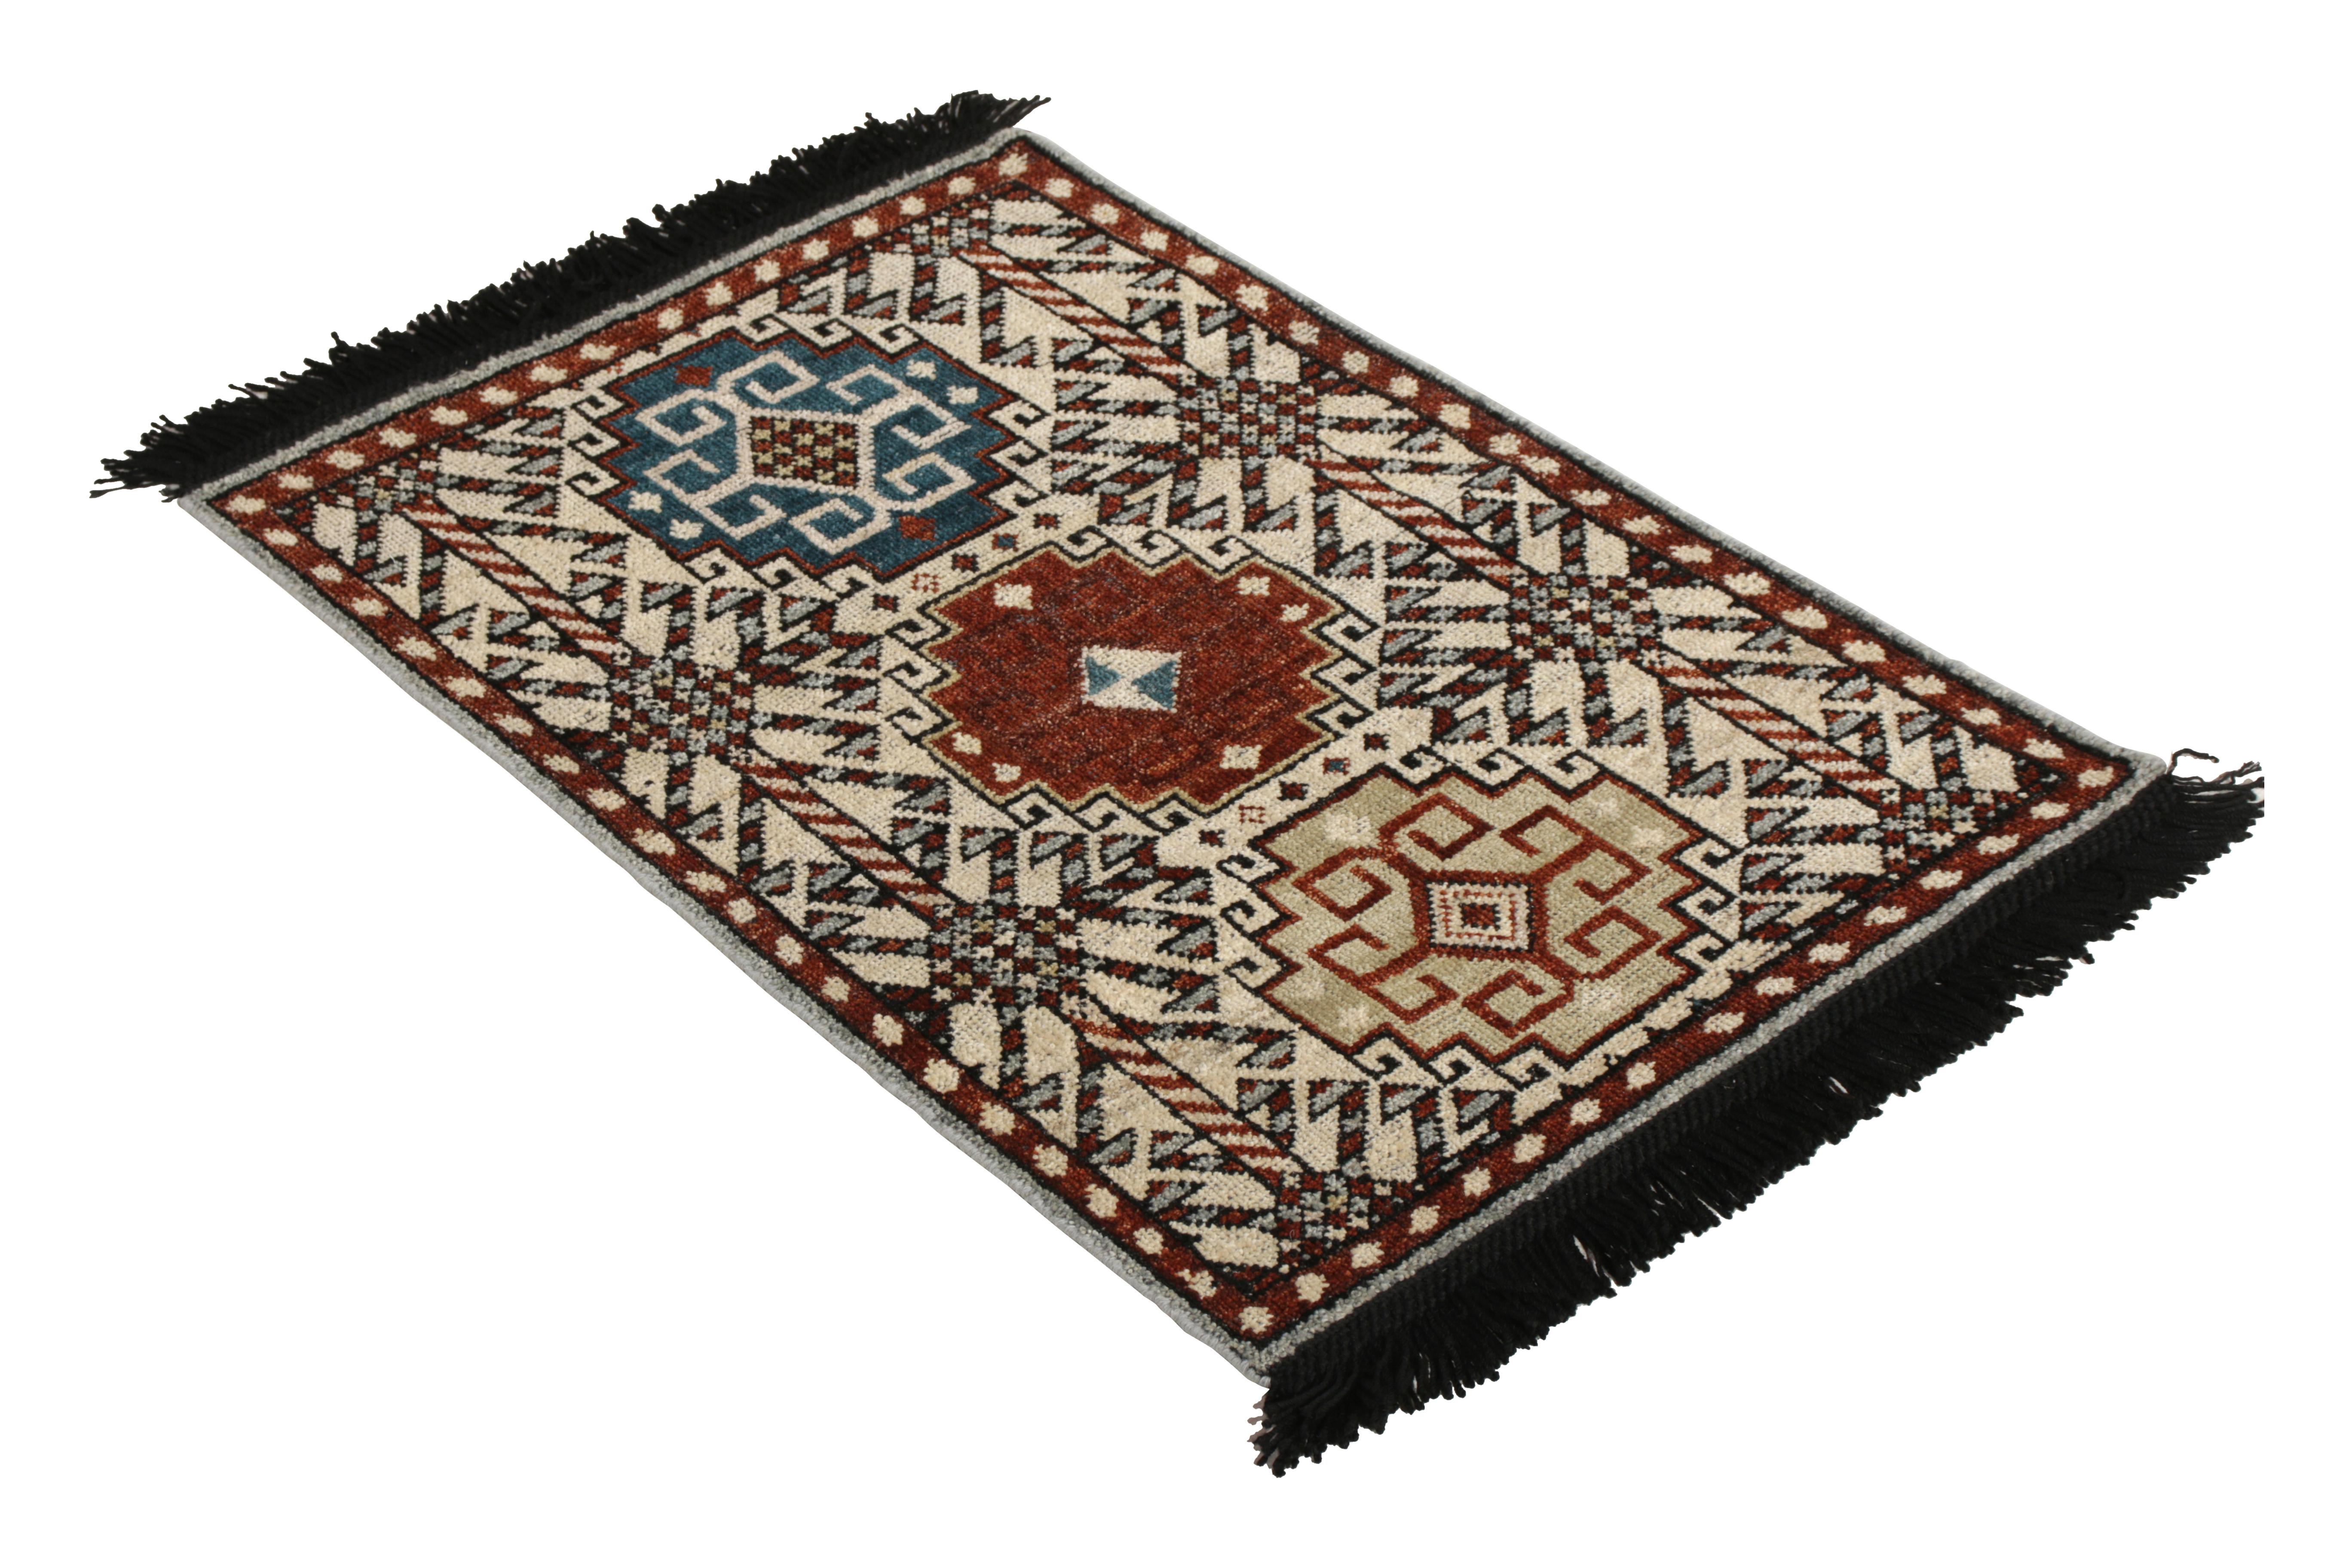 Made in hand knotted wool from the custom classic Burano Collection by Rug & Kilim, this 2 x 3 rug sample is able to be resold as a gift-sized rug for both flooring and wall-hanging projects. Drawing inspiration from an antique Qashqai Persian rug